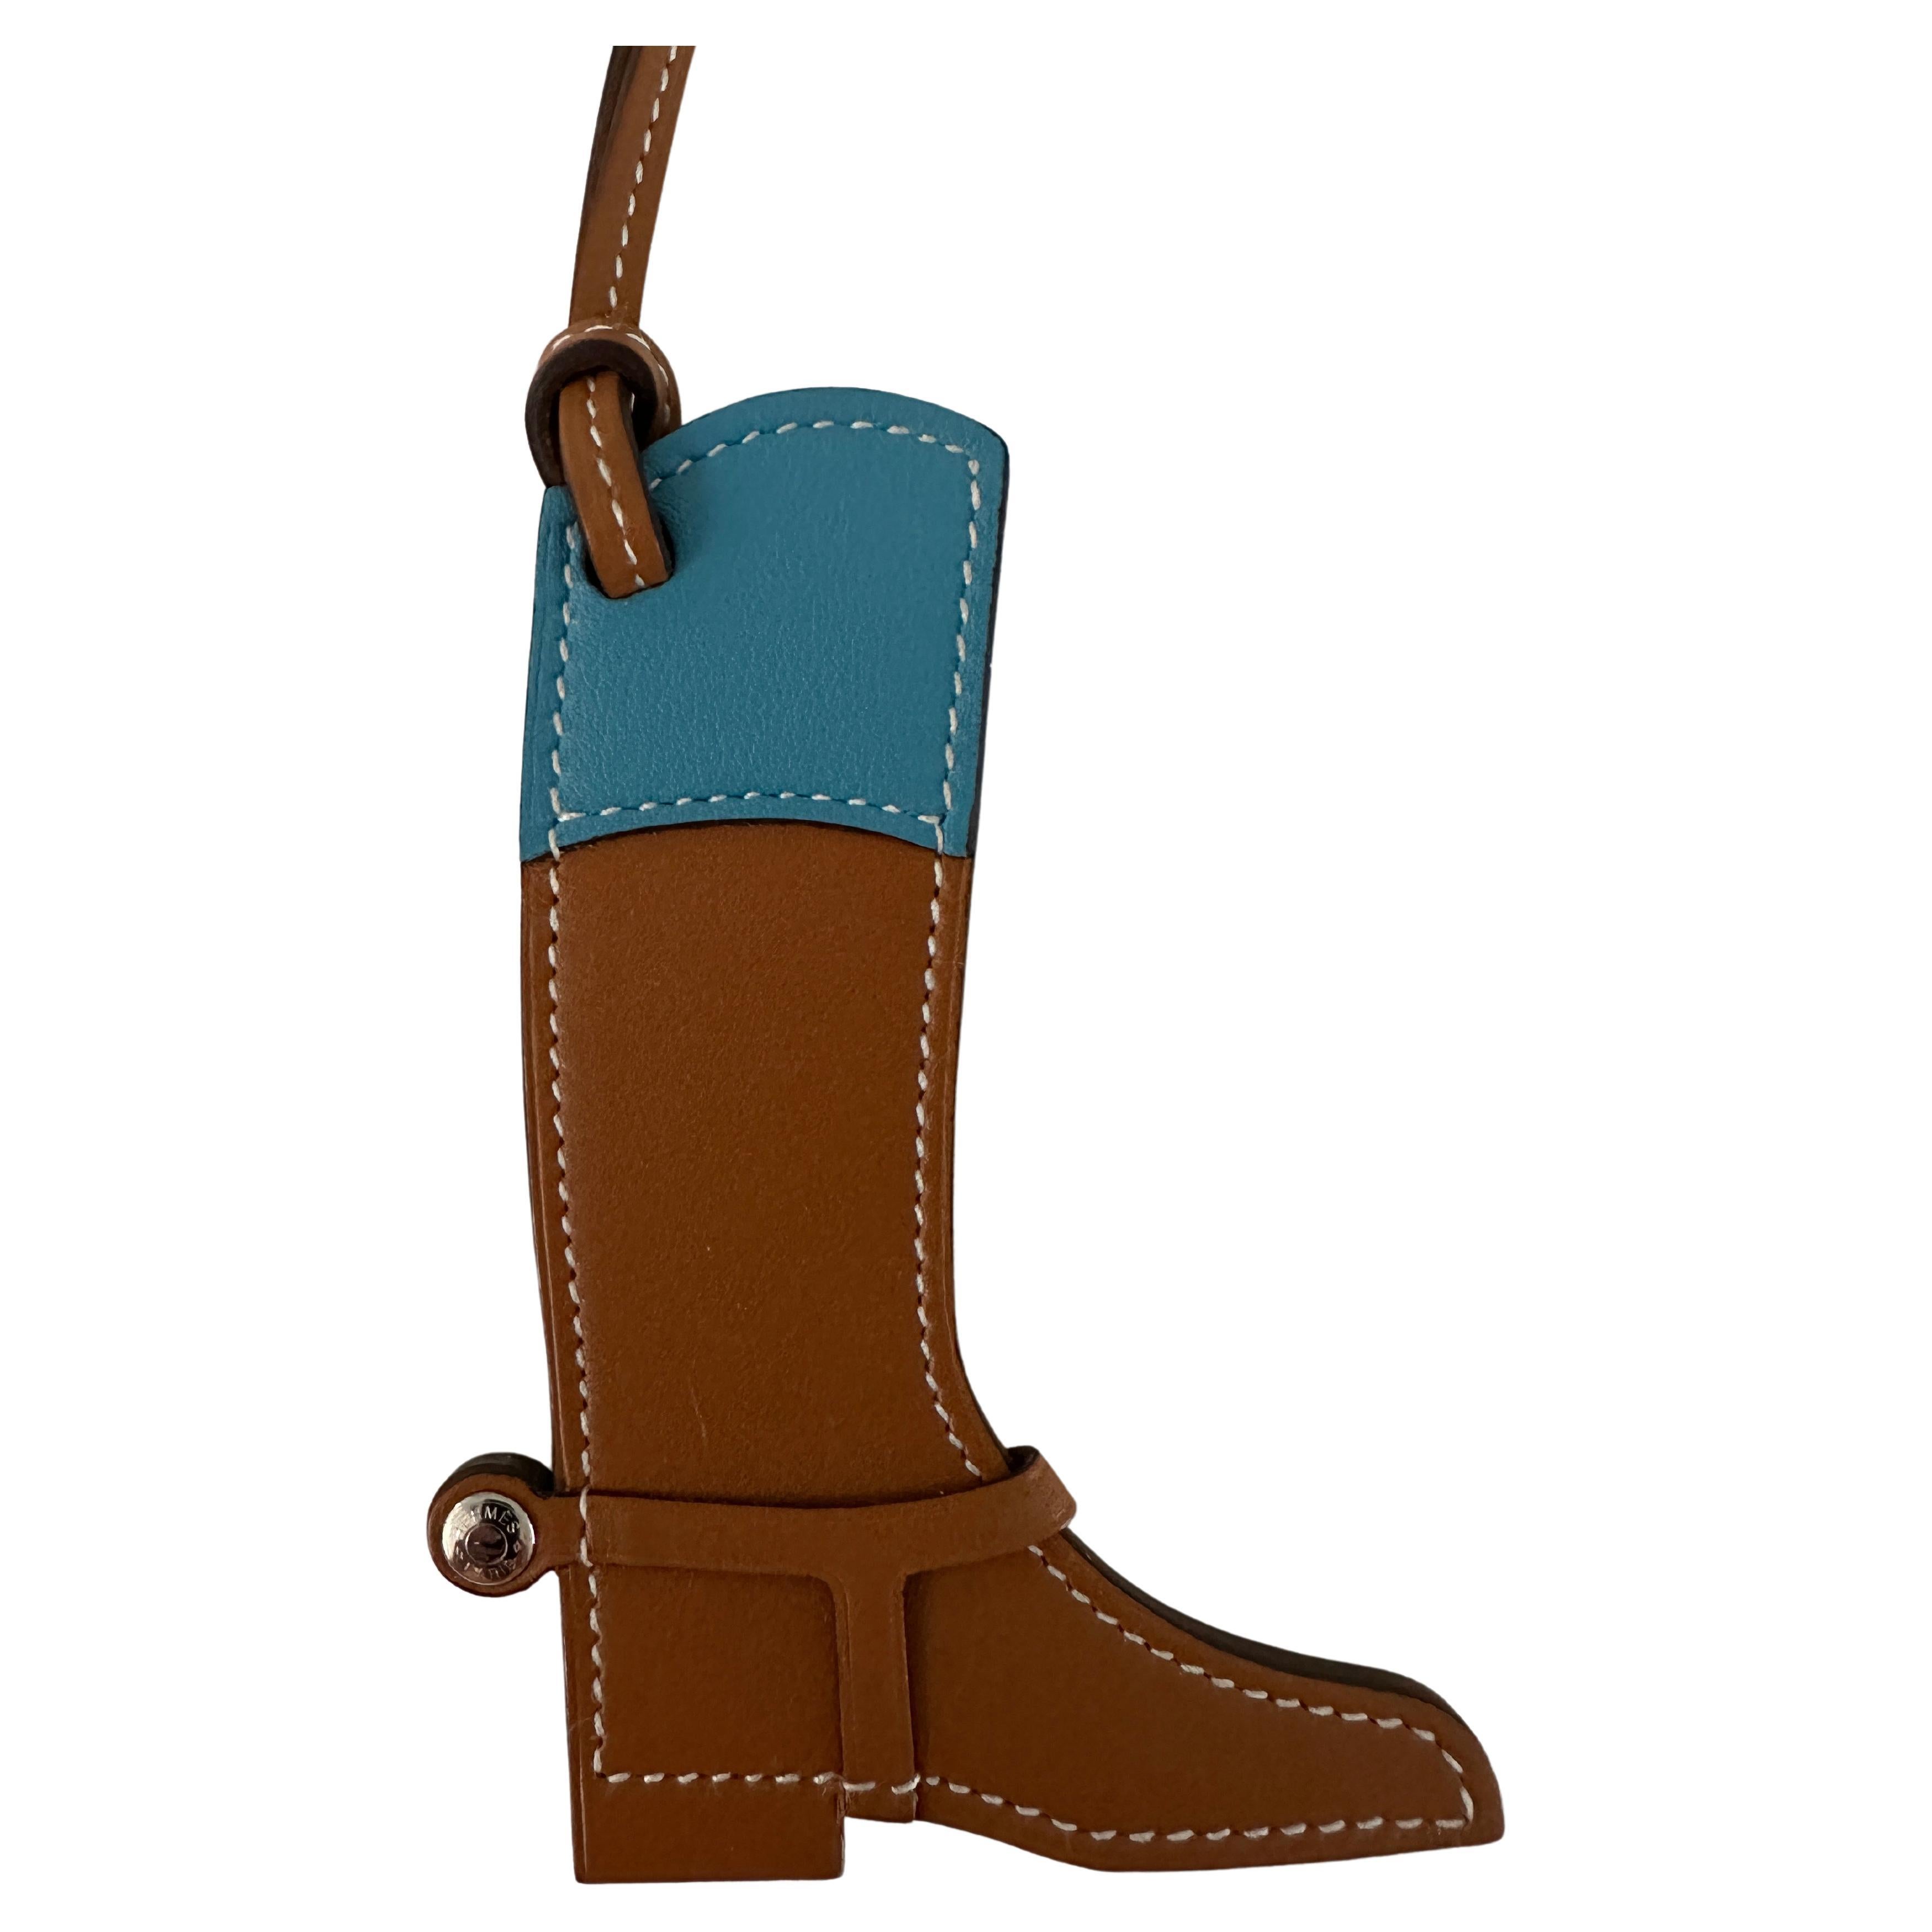 Hermes Paddock Natural Blue Botte Equestrian Boot Leather Charm